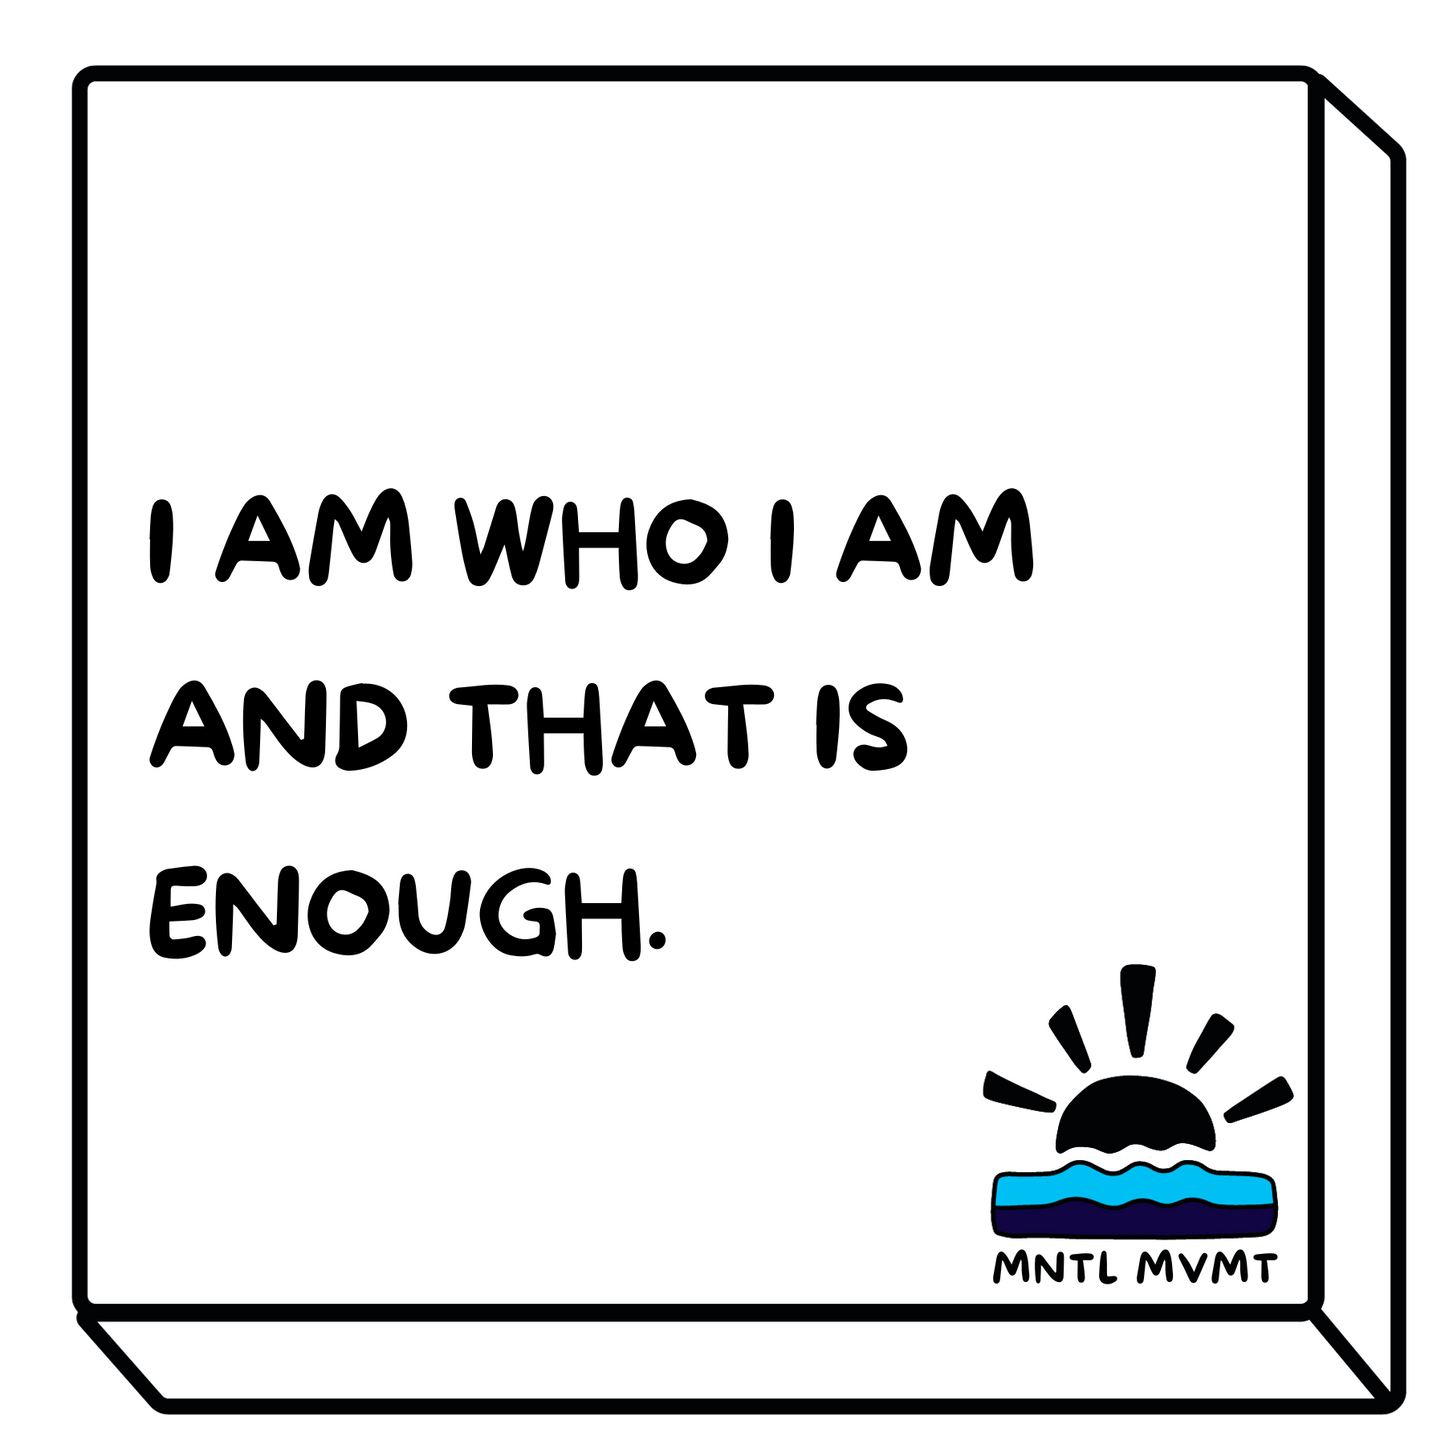 I AM WHO I AM AND THAT IS ENOUGH.